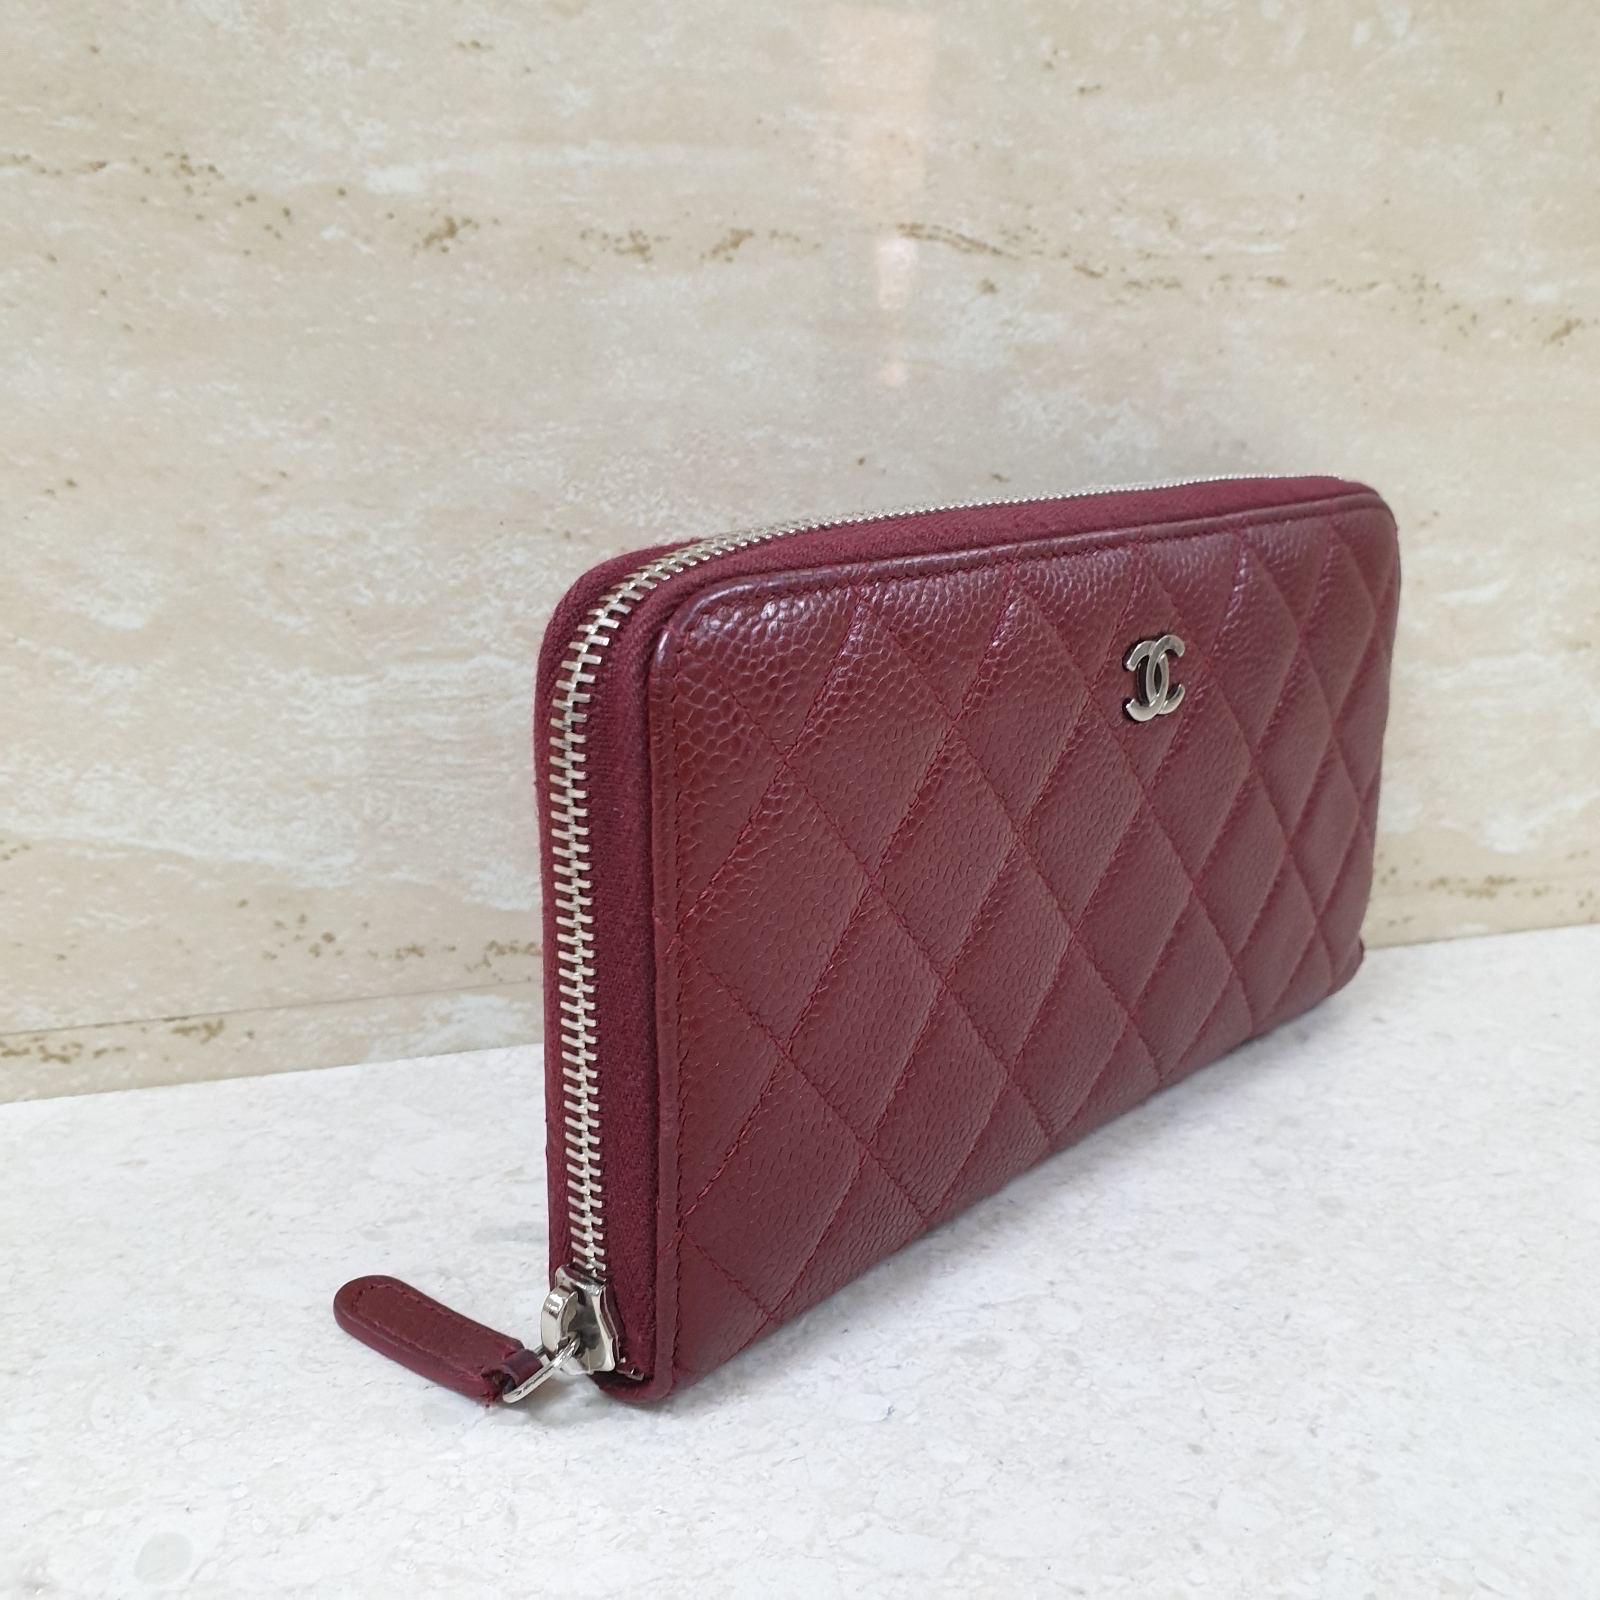 Designed by Coco Chanel in 1925, the interlocking CC logo became Chanel’s signature.
Crafted from burgundy caviar leather with a diamond-quilted construction, this continental wallet displays the iconic motif to the front for an instantly